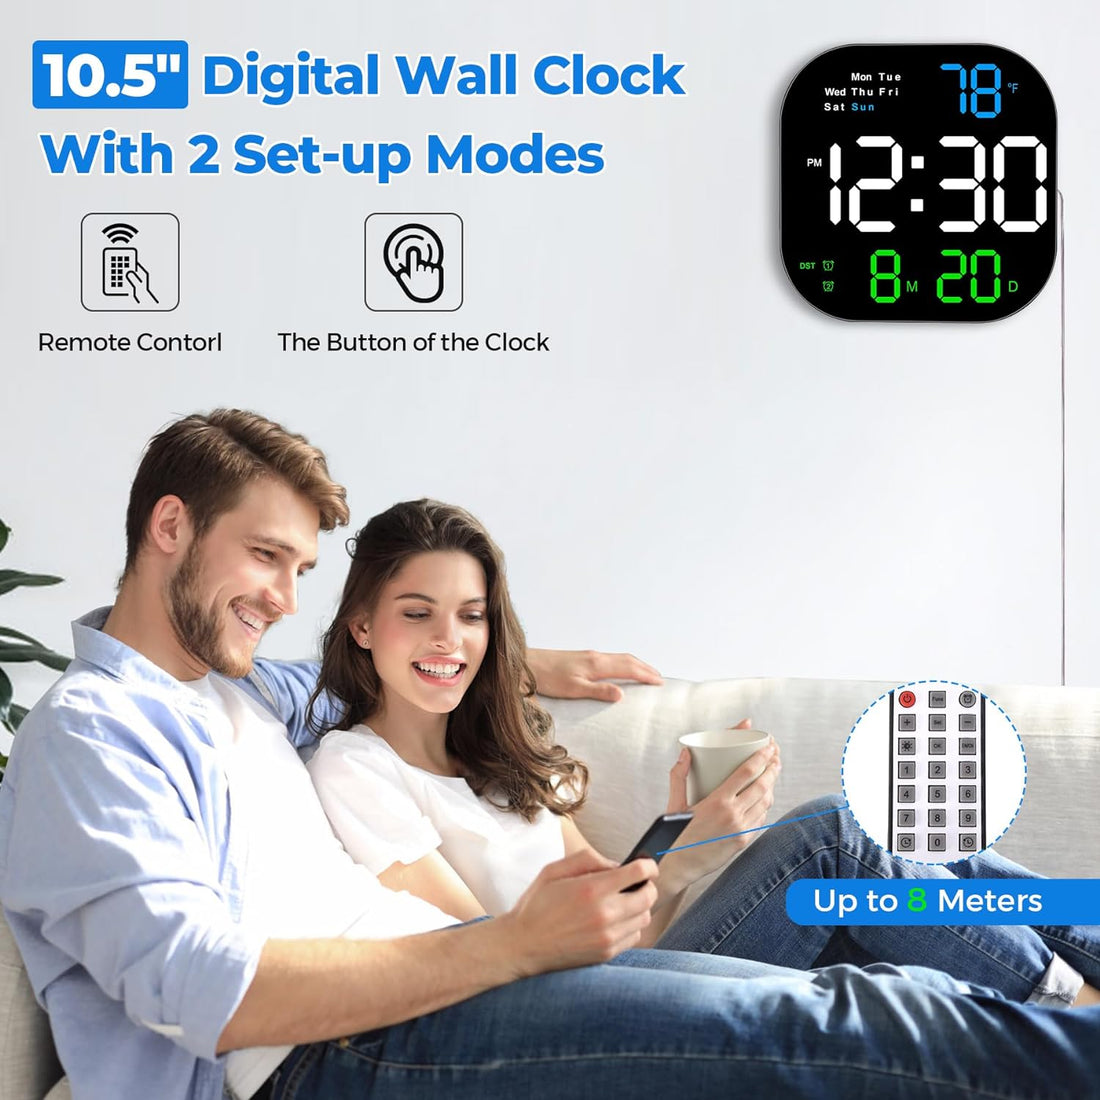 SZELAM Digital Wall Clock, 10.5” LED Digital Alarm Clock Large Display with Remote Control, Date and Temperature, Auto Dimming, Day of Week, for Living Room Office Bedroom Decor Elderly - Mixed